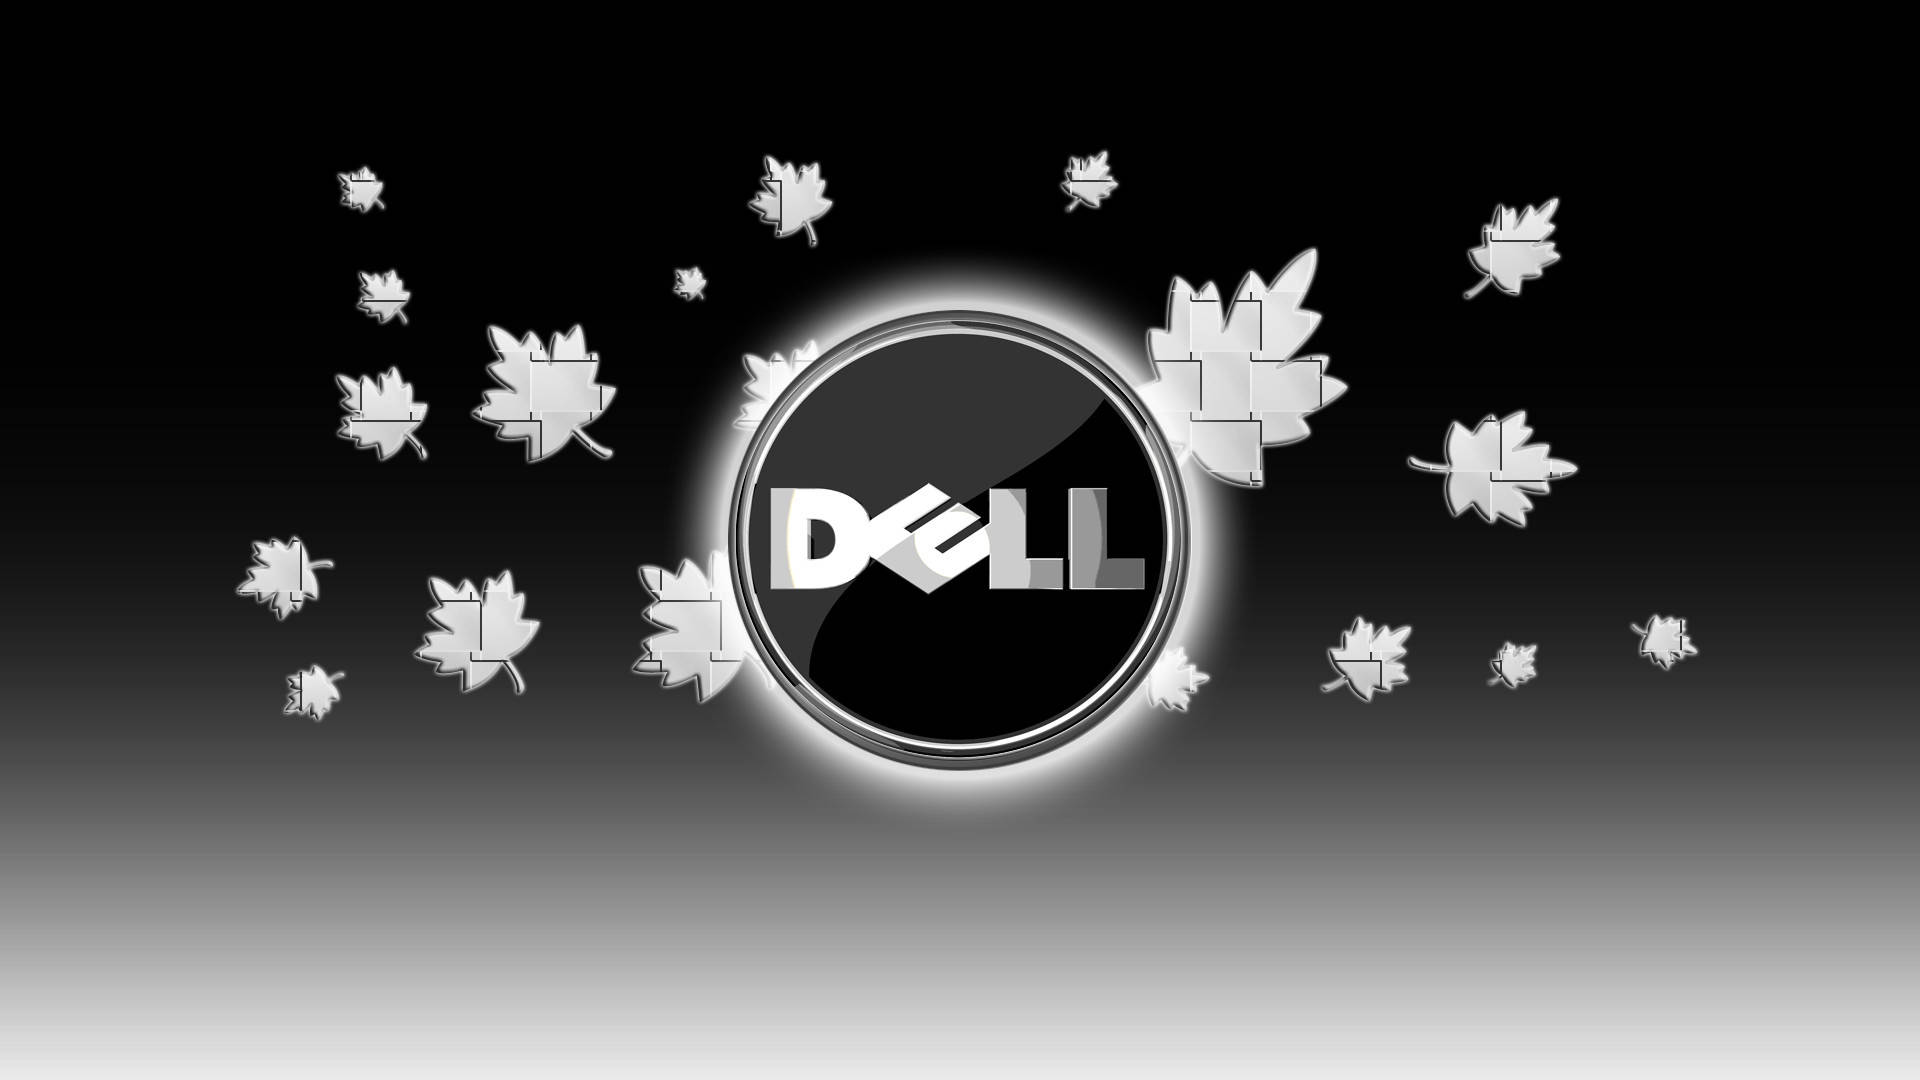 Fall Leaves And Dell Hd Logo Background